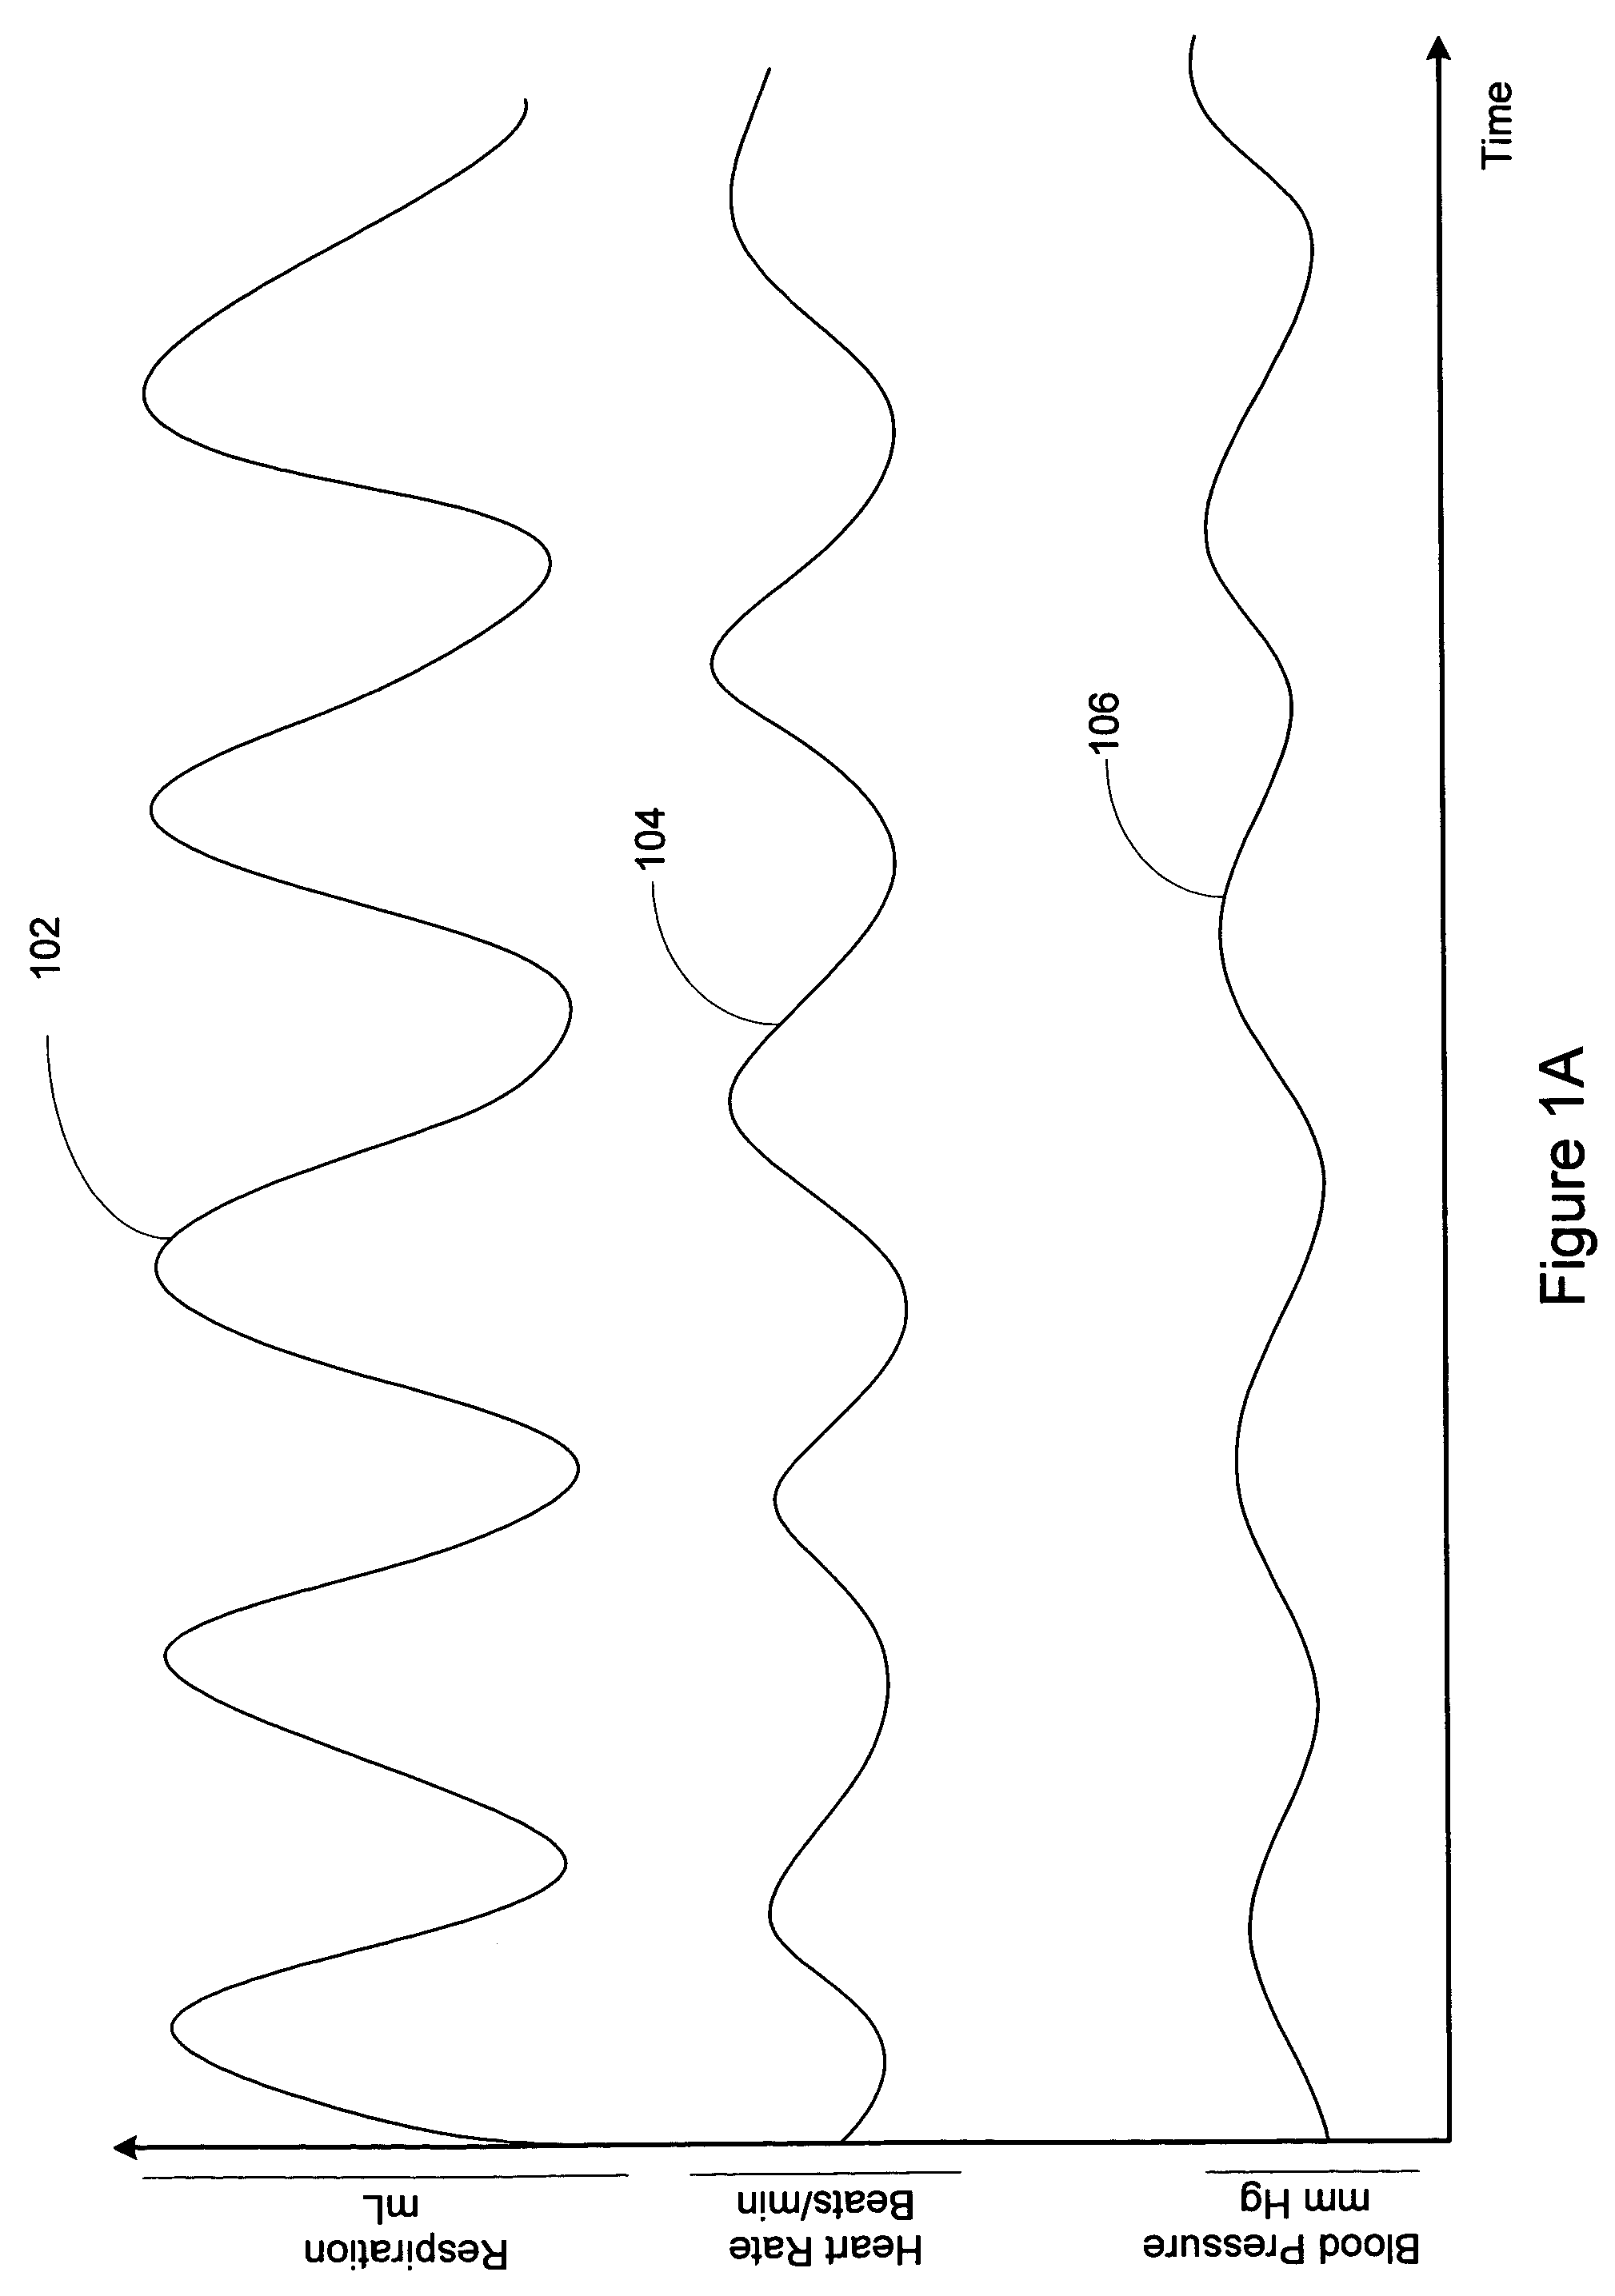 Method and apparatus for mimicking respiratory sinus arrhythmia with cardiac pacing controlled via external respiration therapy device